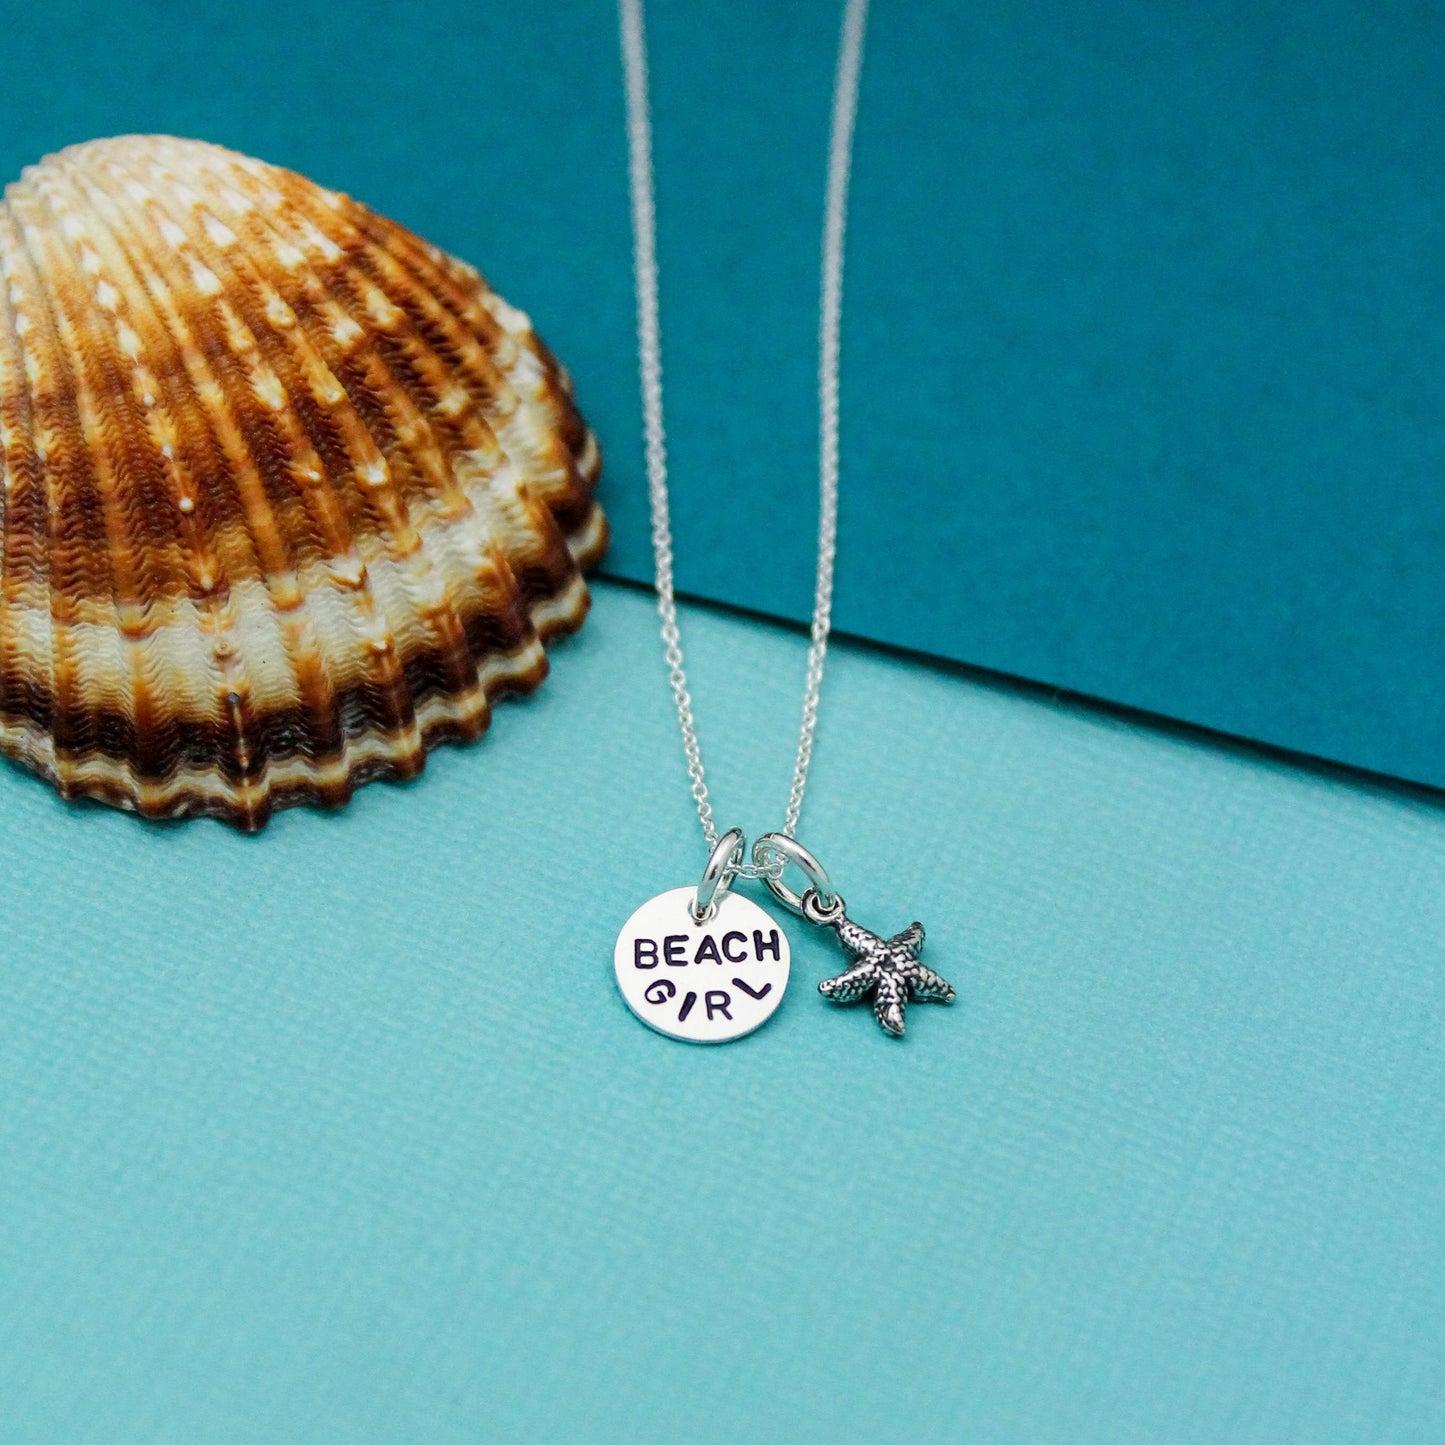 Beach Girl Necklace Personalized Sterling Silver, Hand Stamped Jewelry Gift, Beach Girl Jewelry, Beach Girl Starfish Box Gift, Hand-Stamped